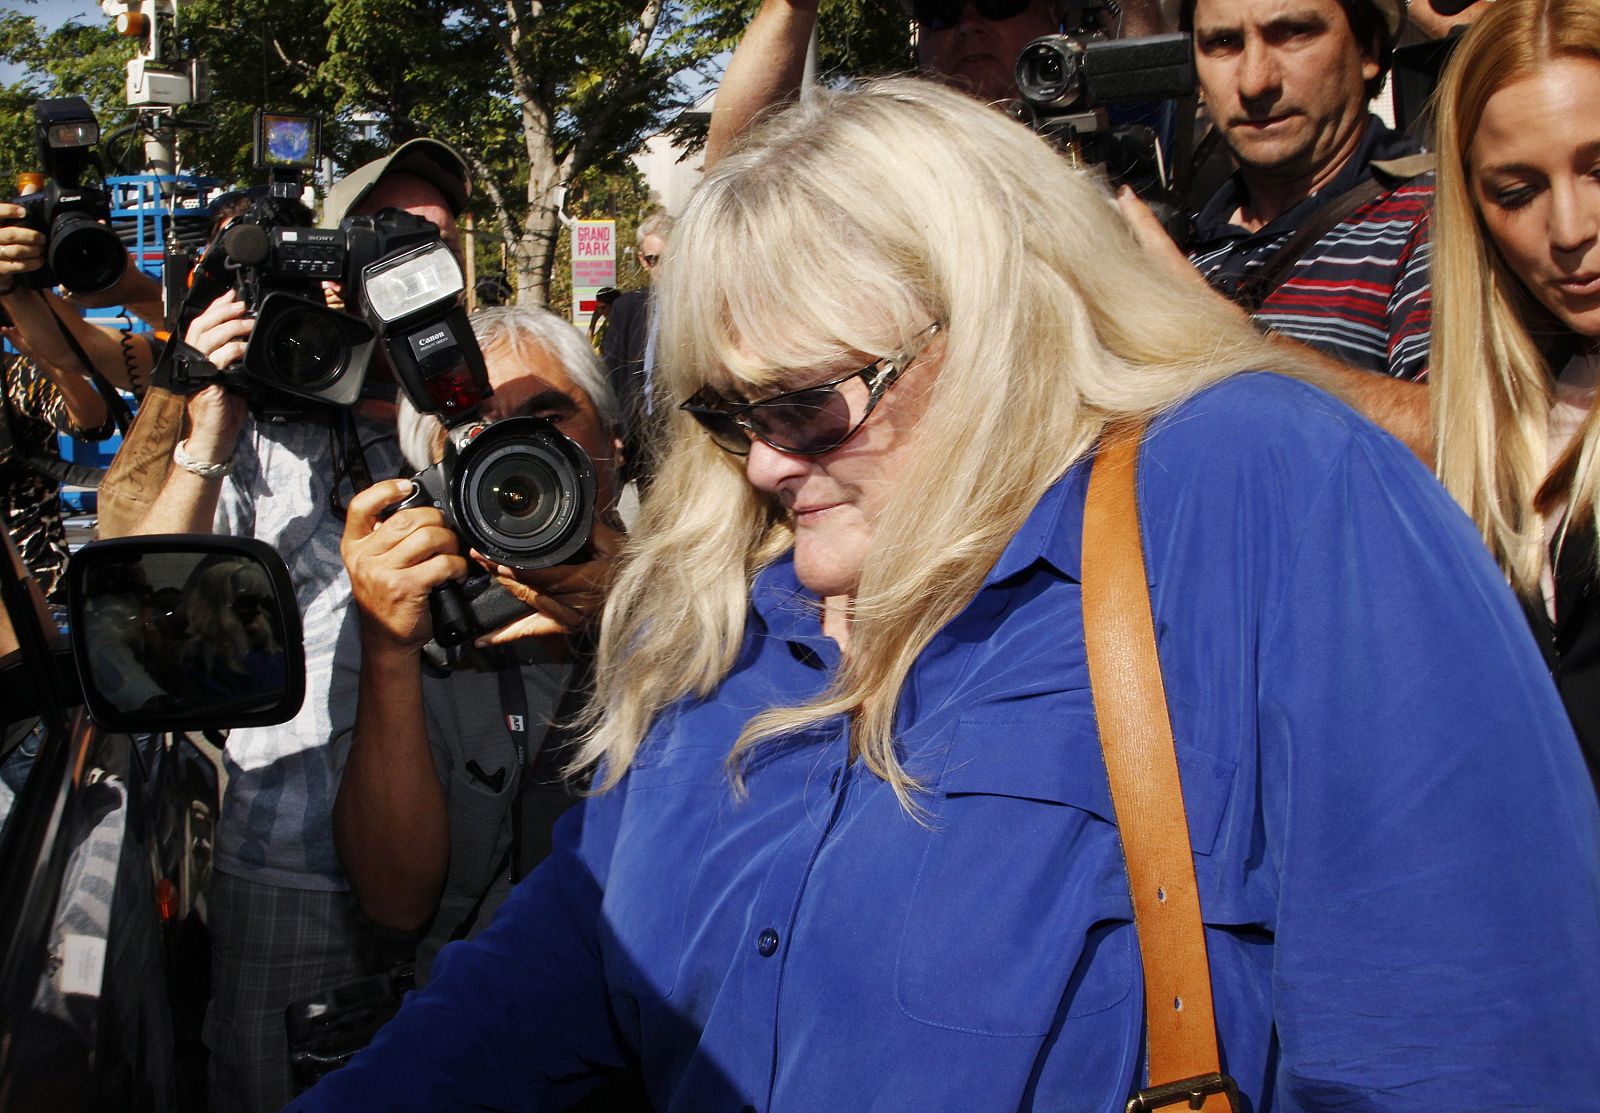 Rowe, ex-wife of singer Michael Jackson, leaves after testifying in a lawsuit brought by the late singer's family against concert promoter AEG Live, at Los Angeles Superior Court in Los Angeles